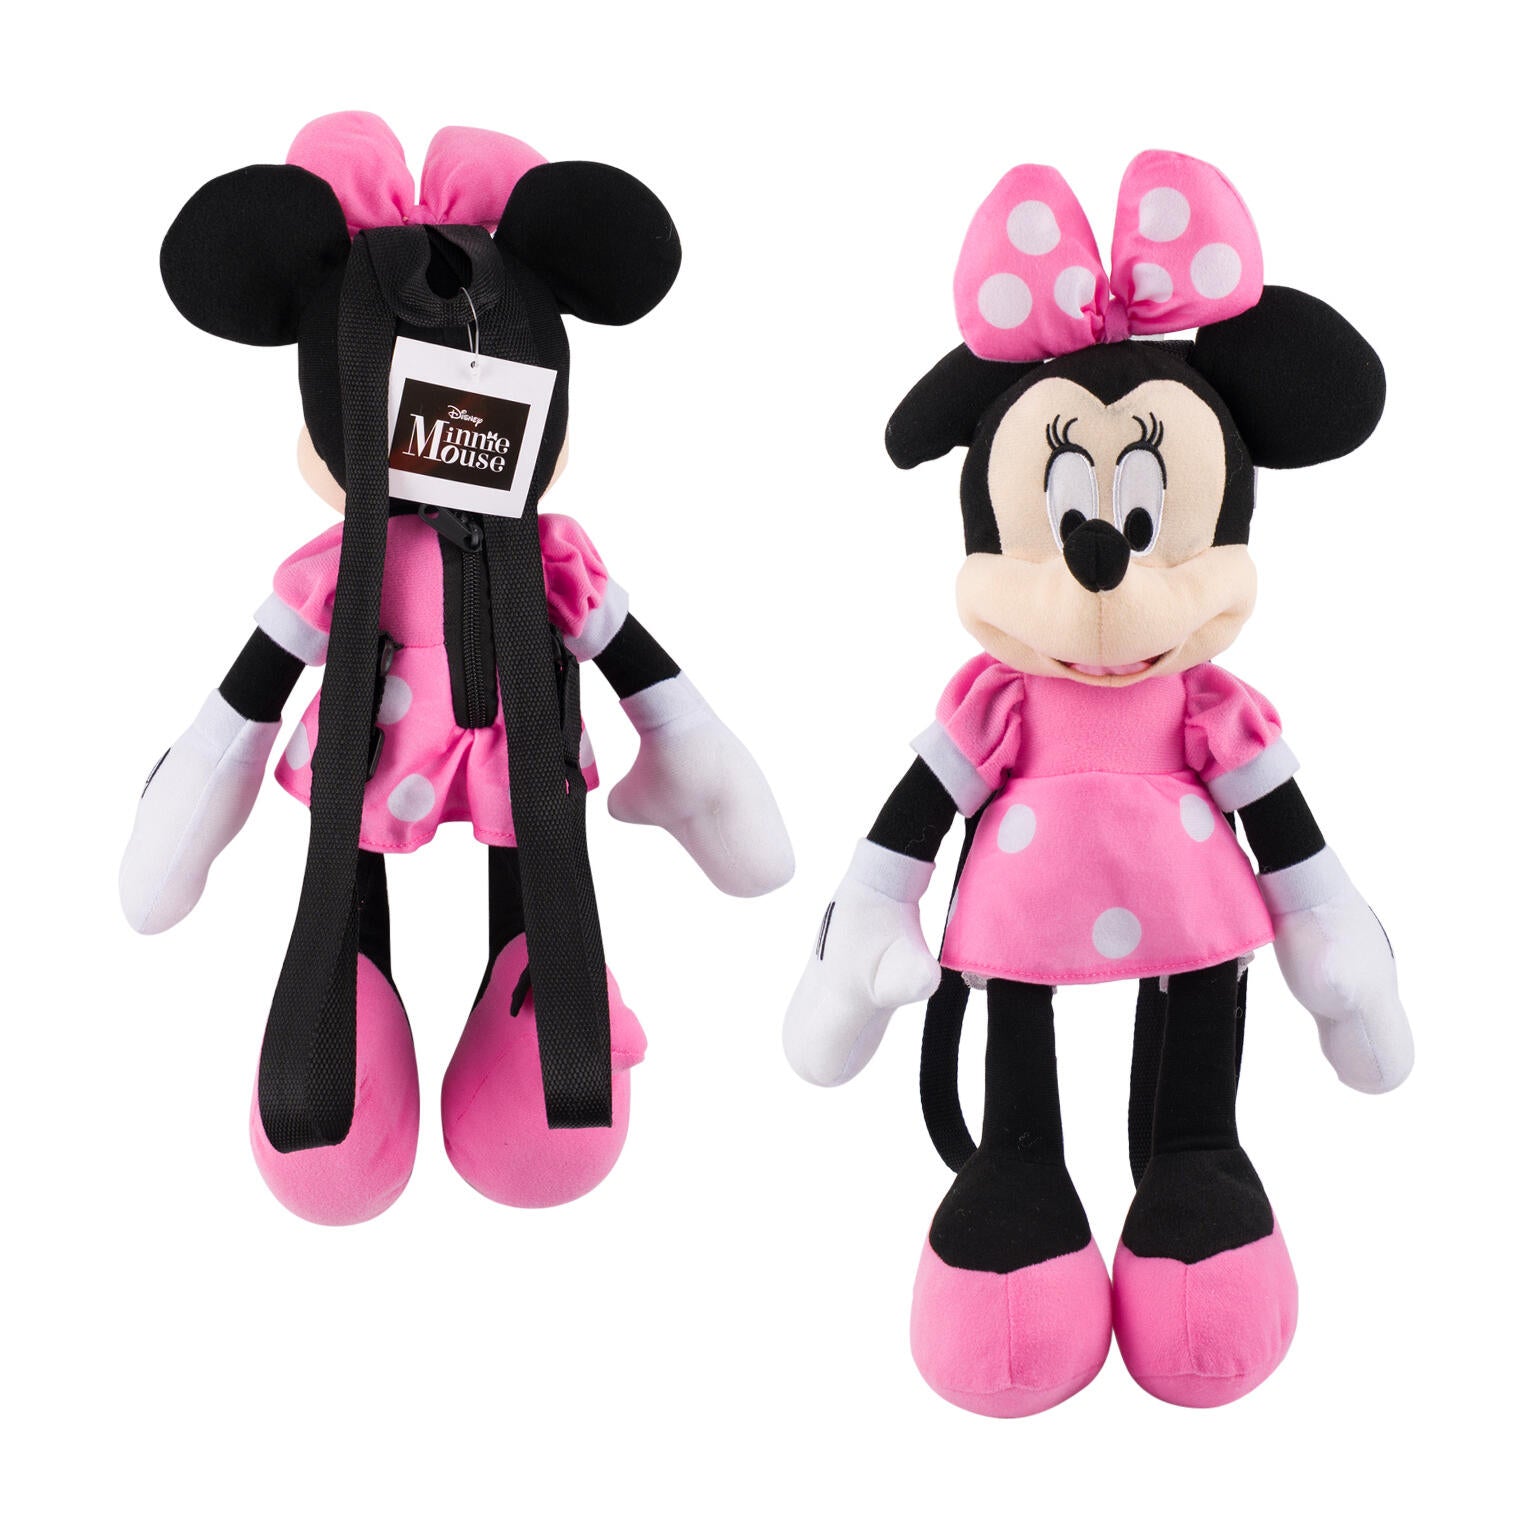 Minnie Mouse Backpack Plush W/ Strap- 16"